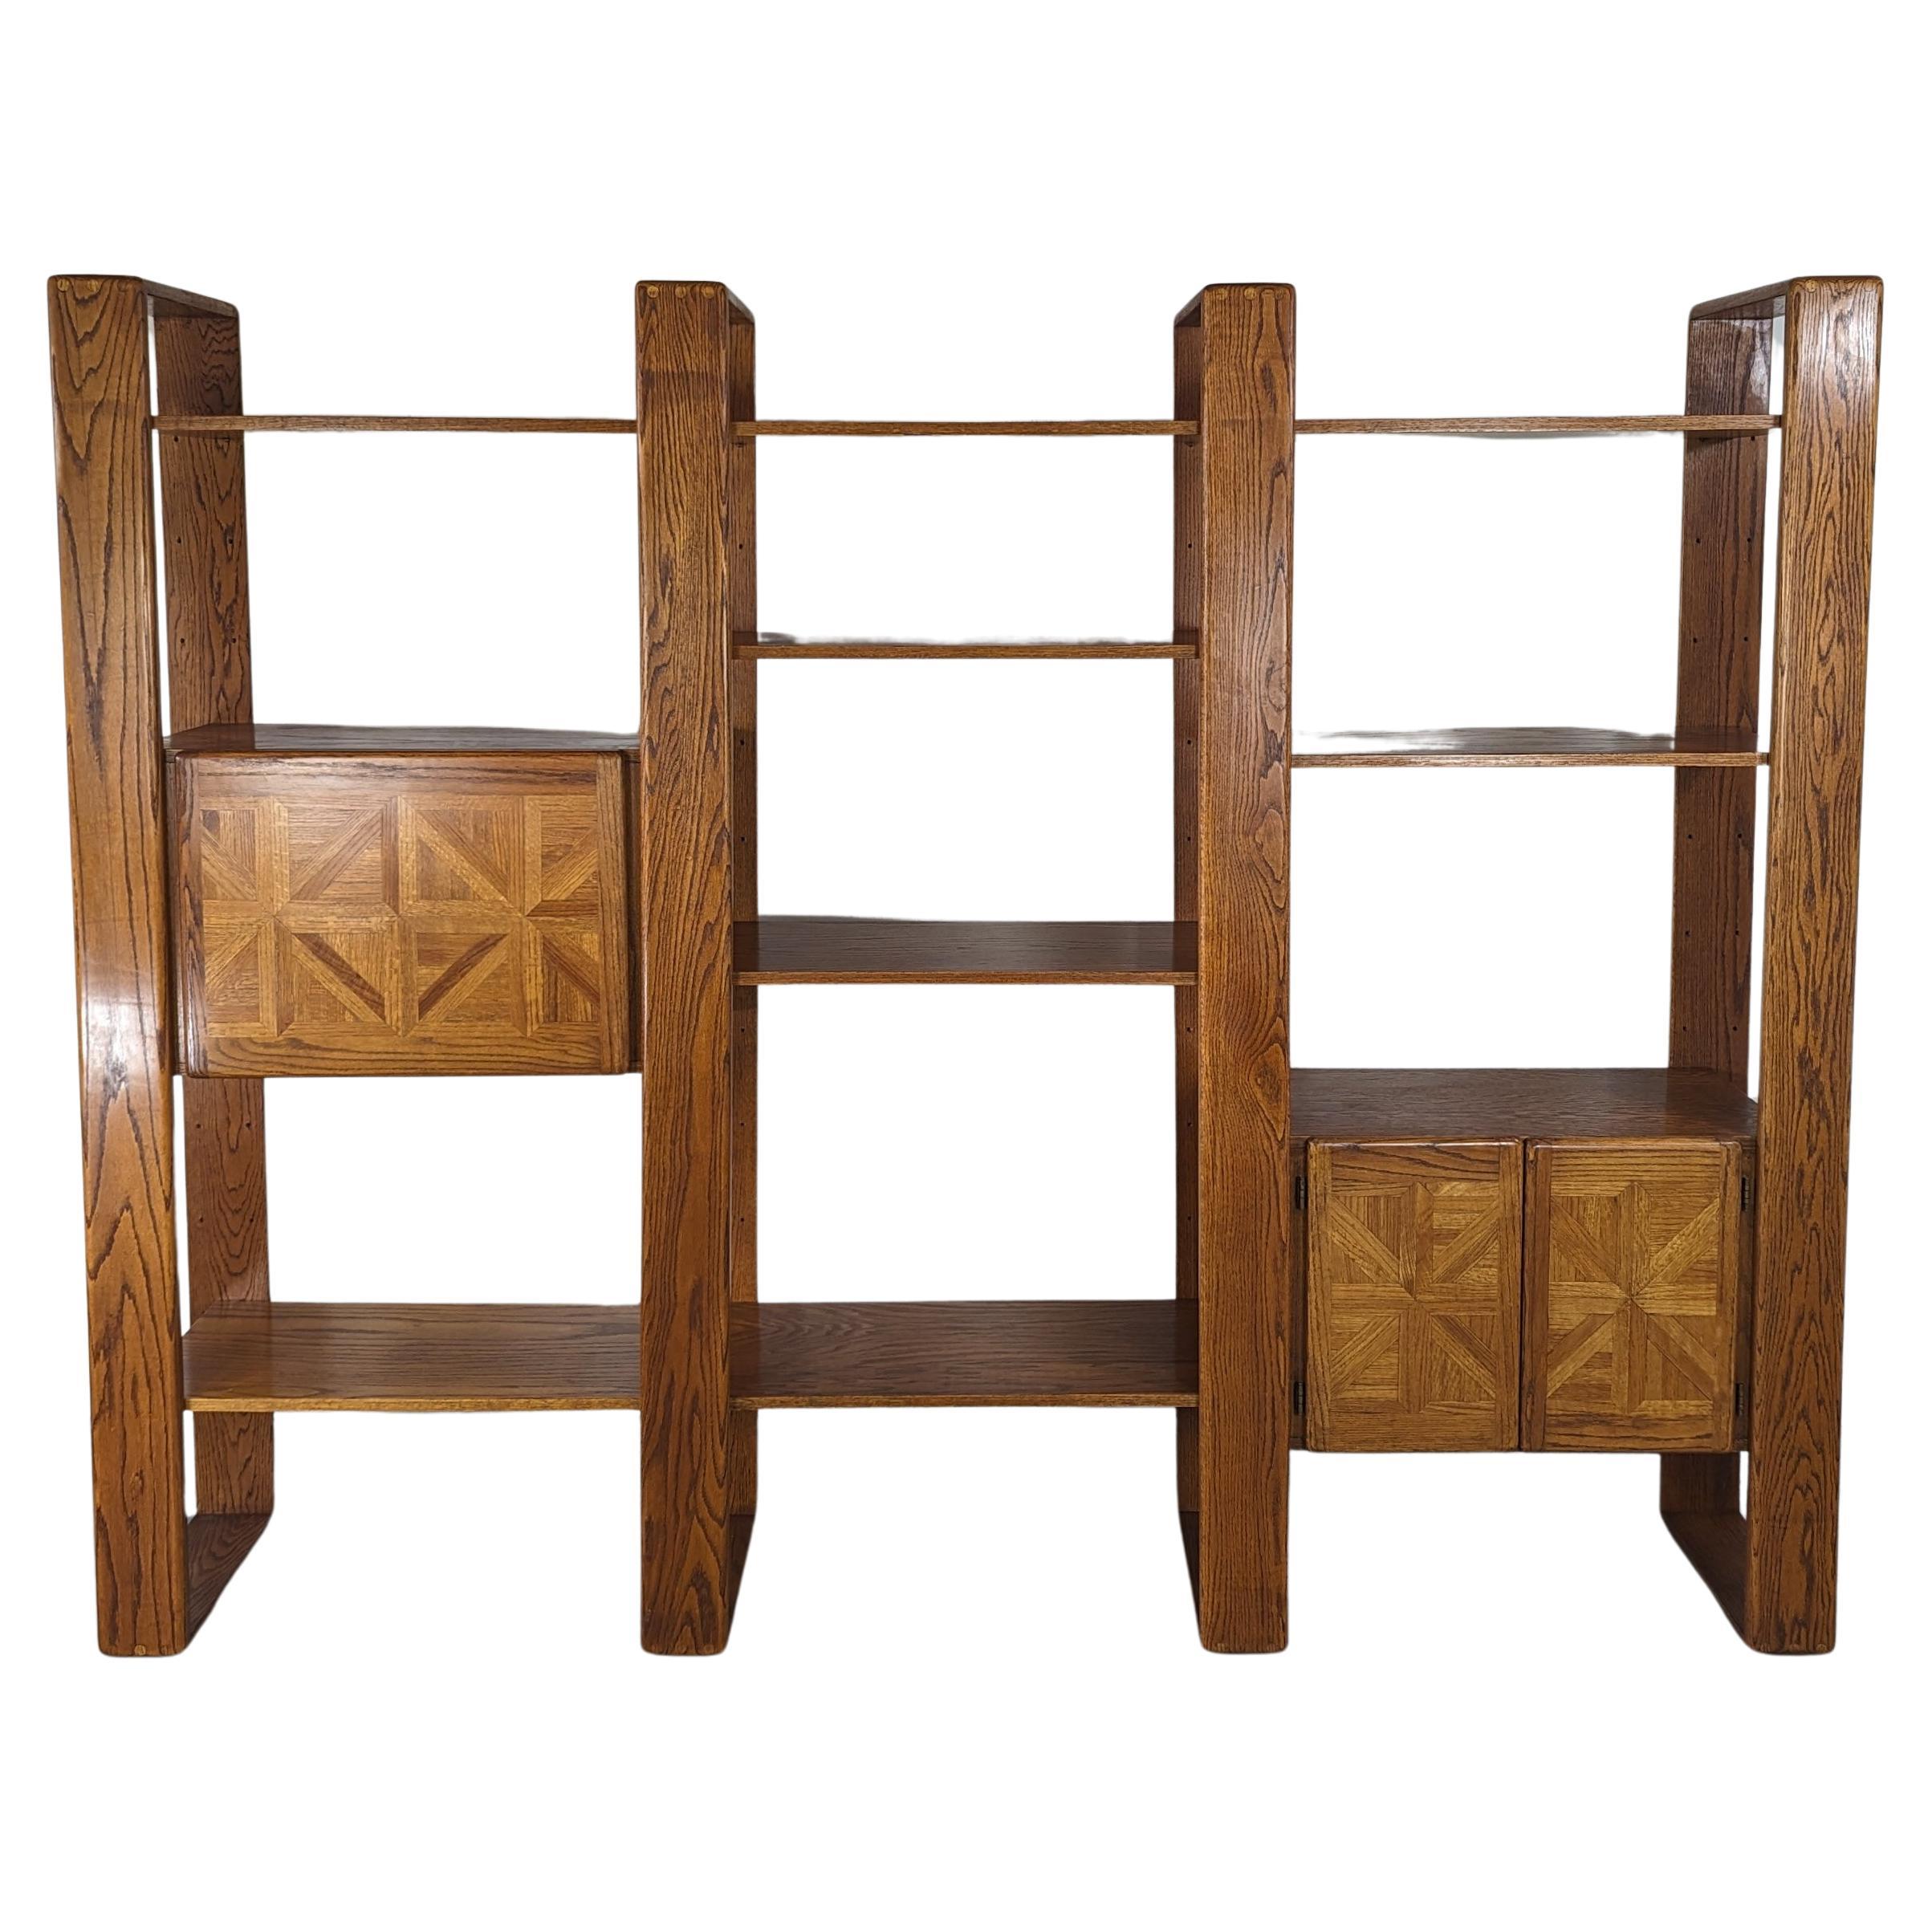 Cerused Oak Modular Wall Unit Shelving or Room Divider by Lou Hodges, c1970s For Sale